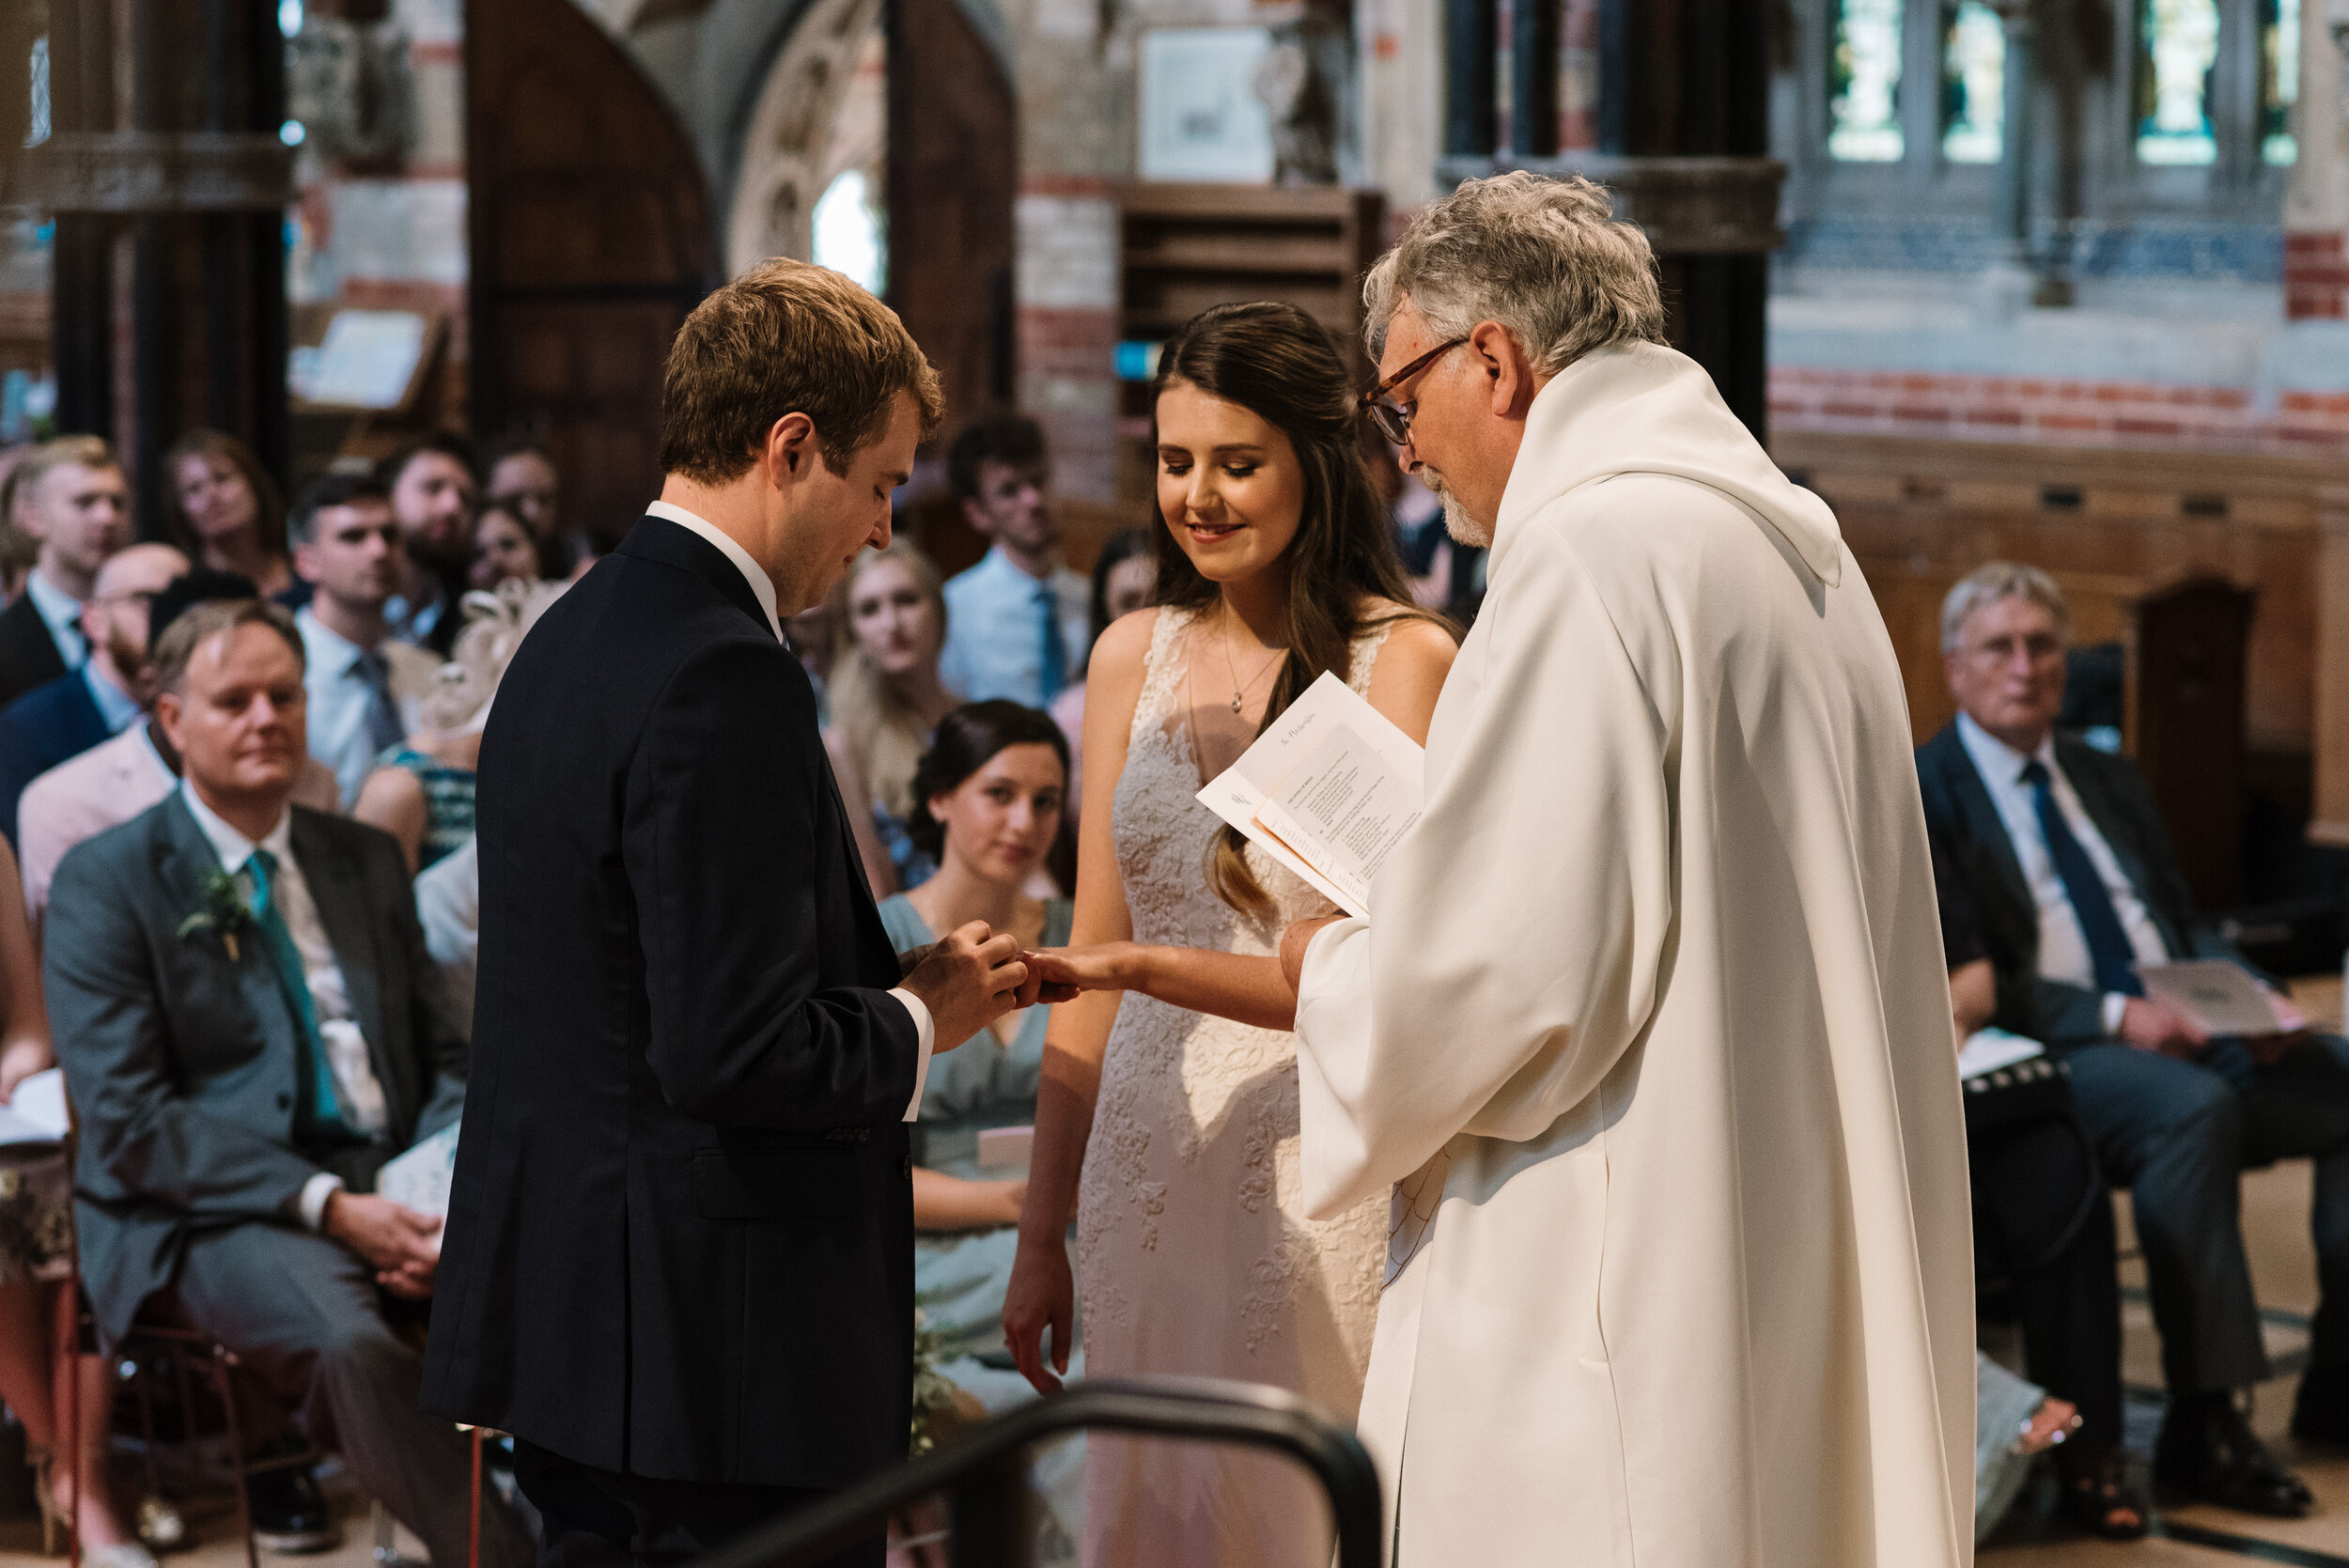 Vicar conducting vows for bride and groom in church wedding